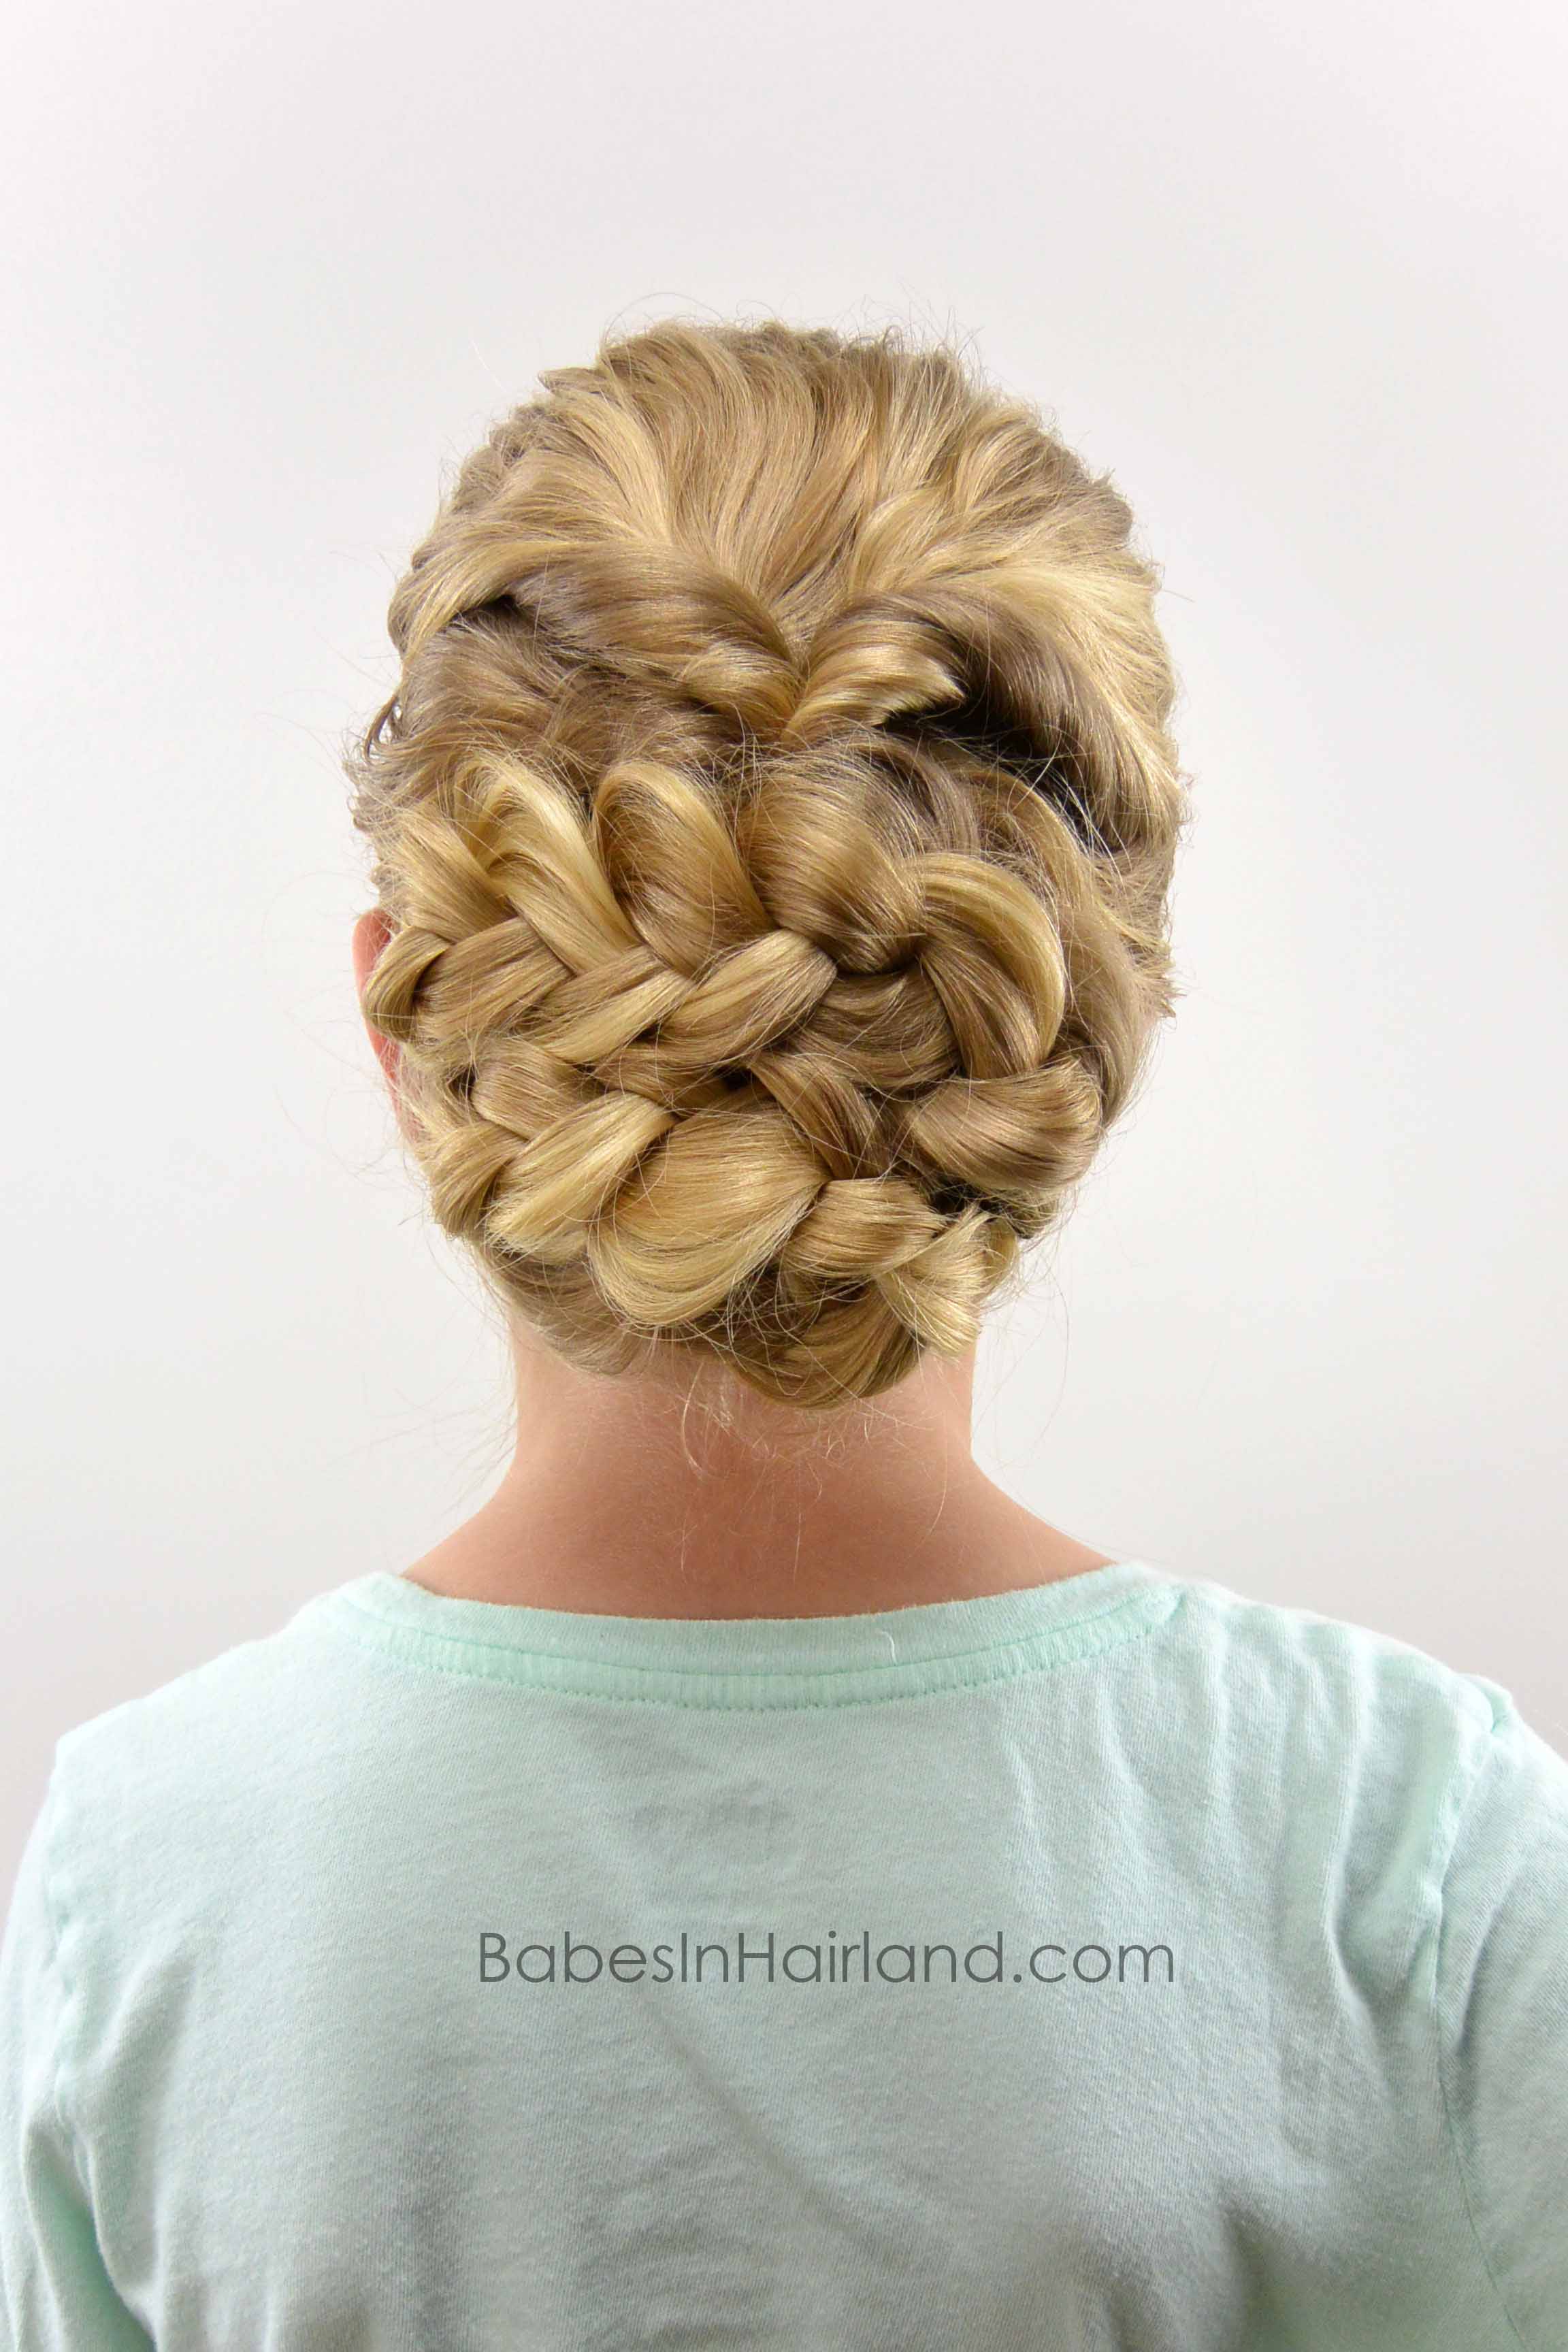 7 Prom Hairstyles! | Hairstyles For Girls - Princess Hairstyles